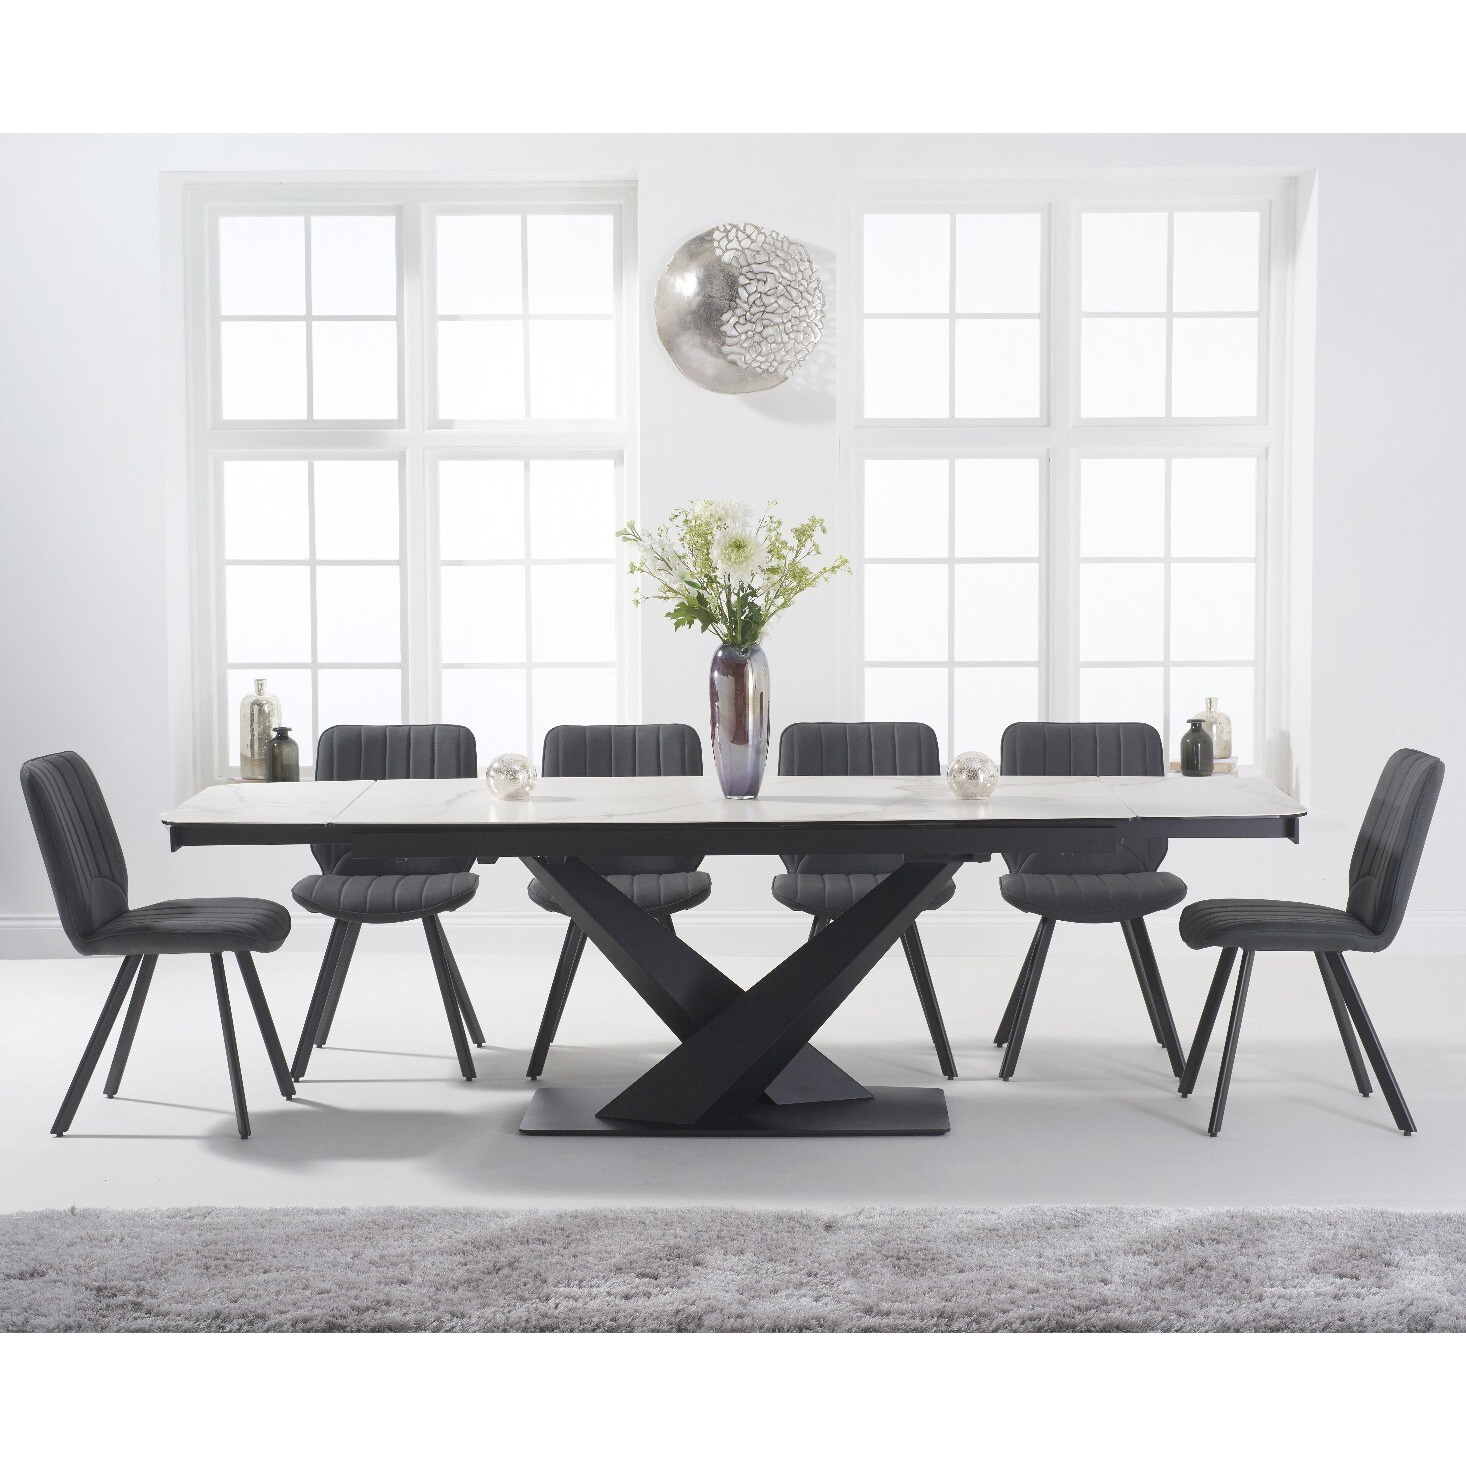 Extending Jacob 180cm White Ceramic Dining Table with 6 Brown Hendrick Chairs